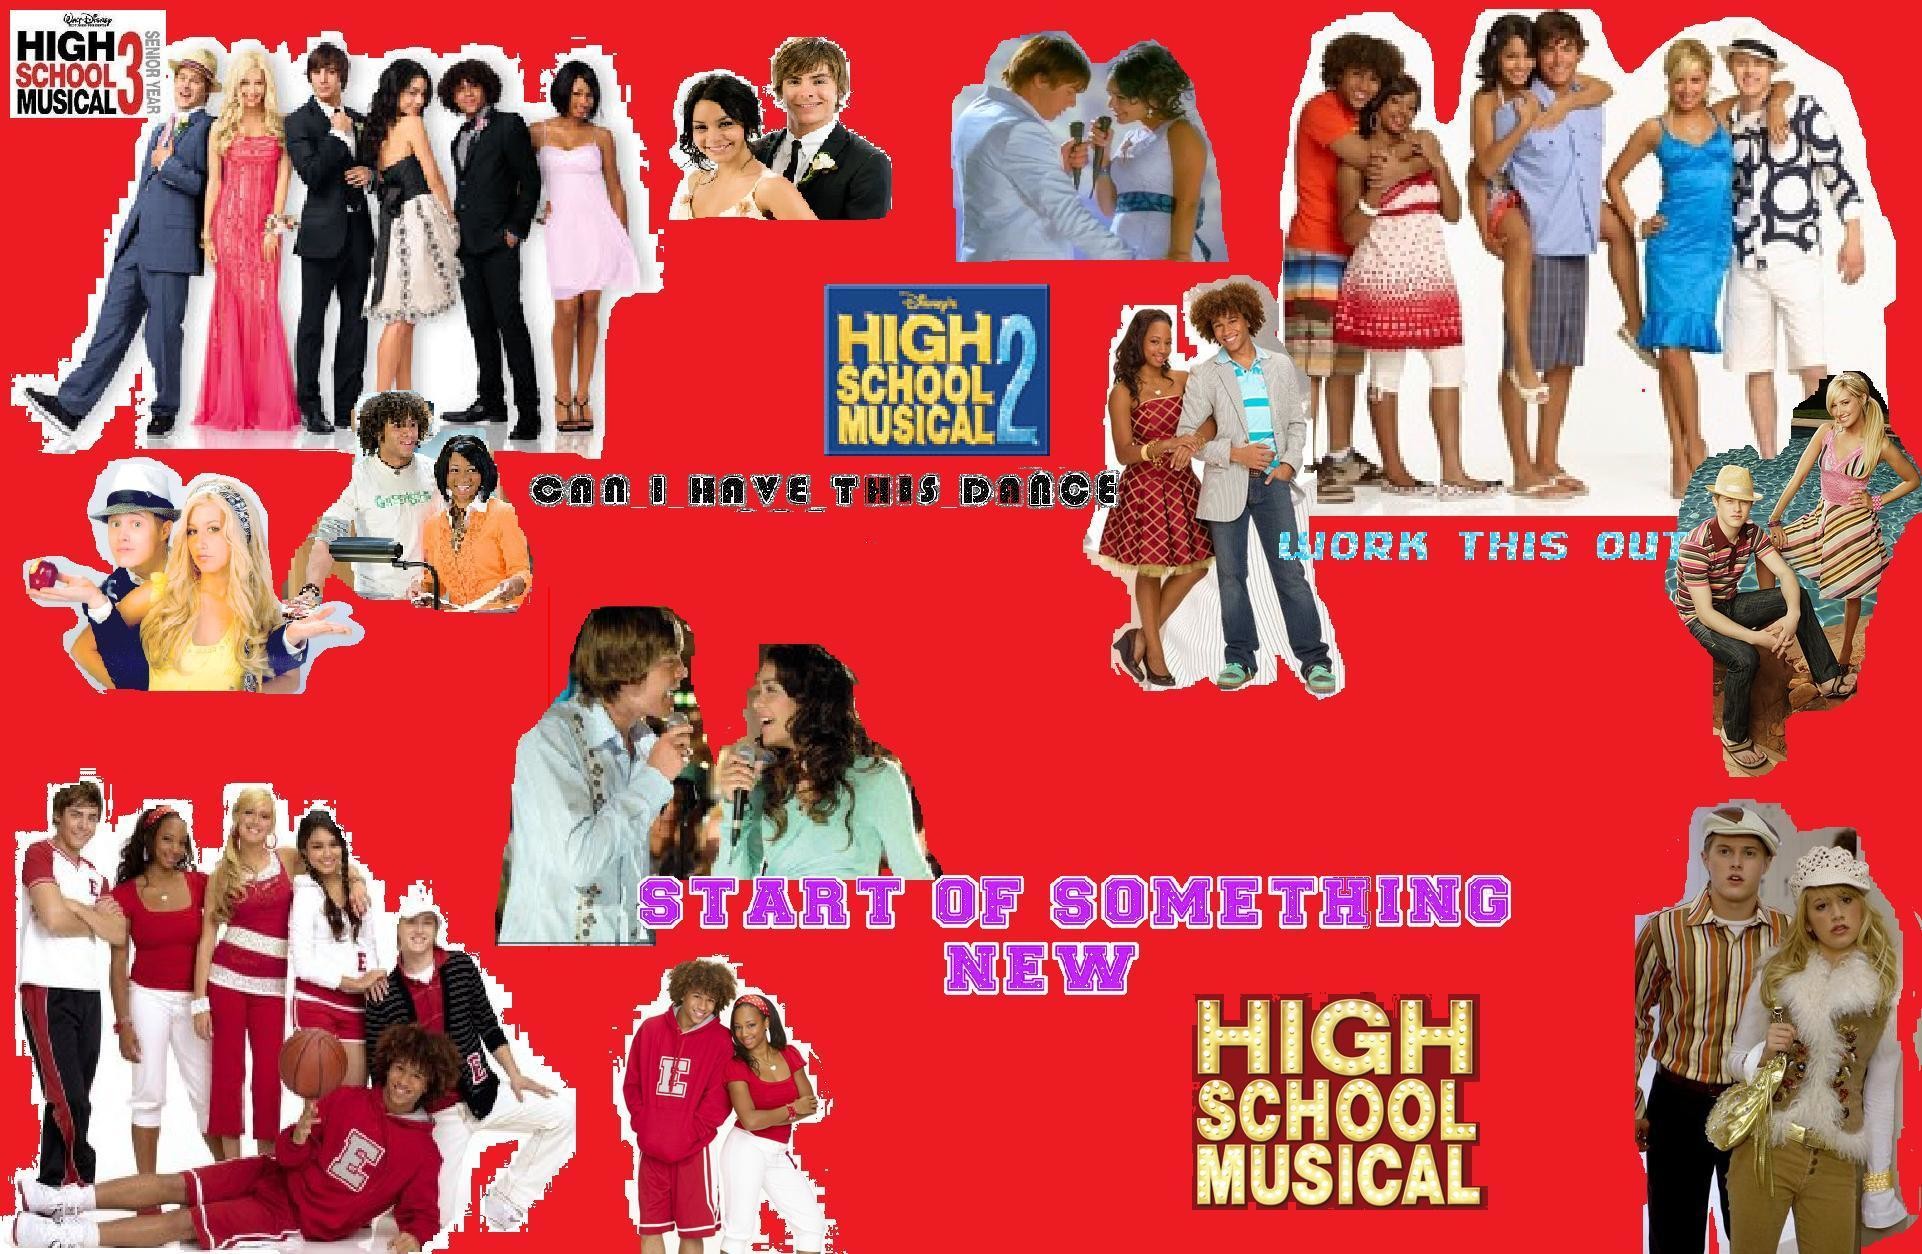 High School Musical 1, 2 And 3 Images Hsm Wallpaper - High School Musical - HD Wallpaper 